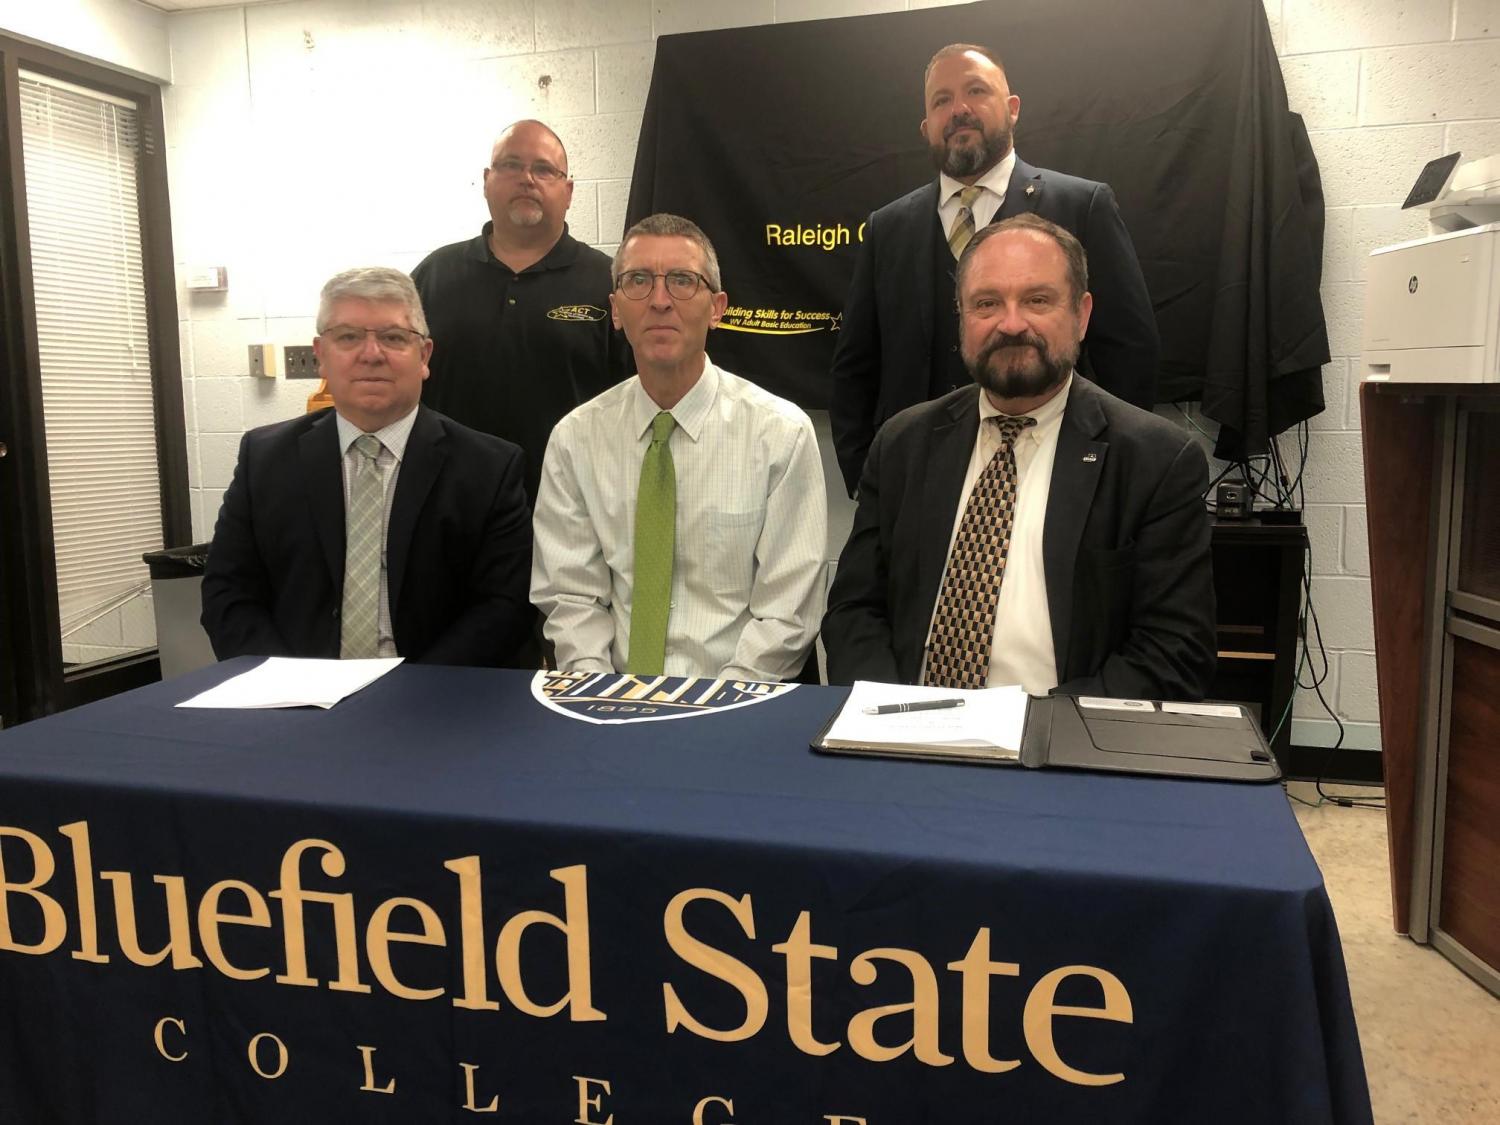 A new Articulation Agreement involving Bluefield State College, Raleigh County Public Schools, and the Raleigh County Academy of Careers and Technology (ACT) permits qualifying students to earn 14 hours of college credit while completing the Academy's Law Enforcement, Corrections and Security Cluster